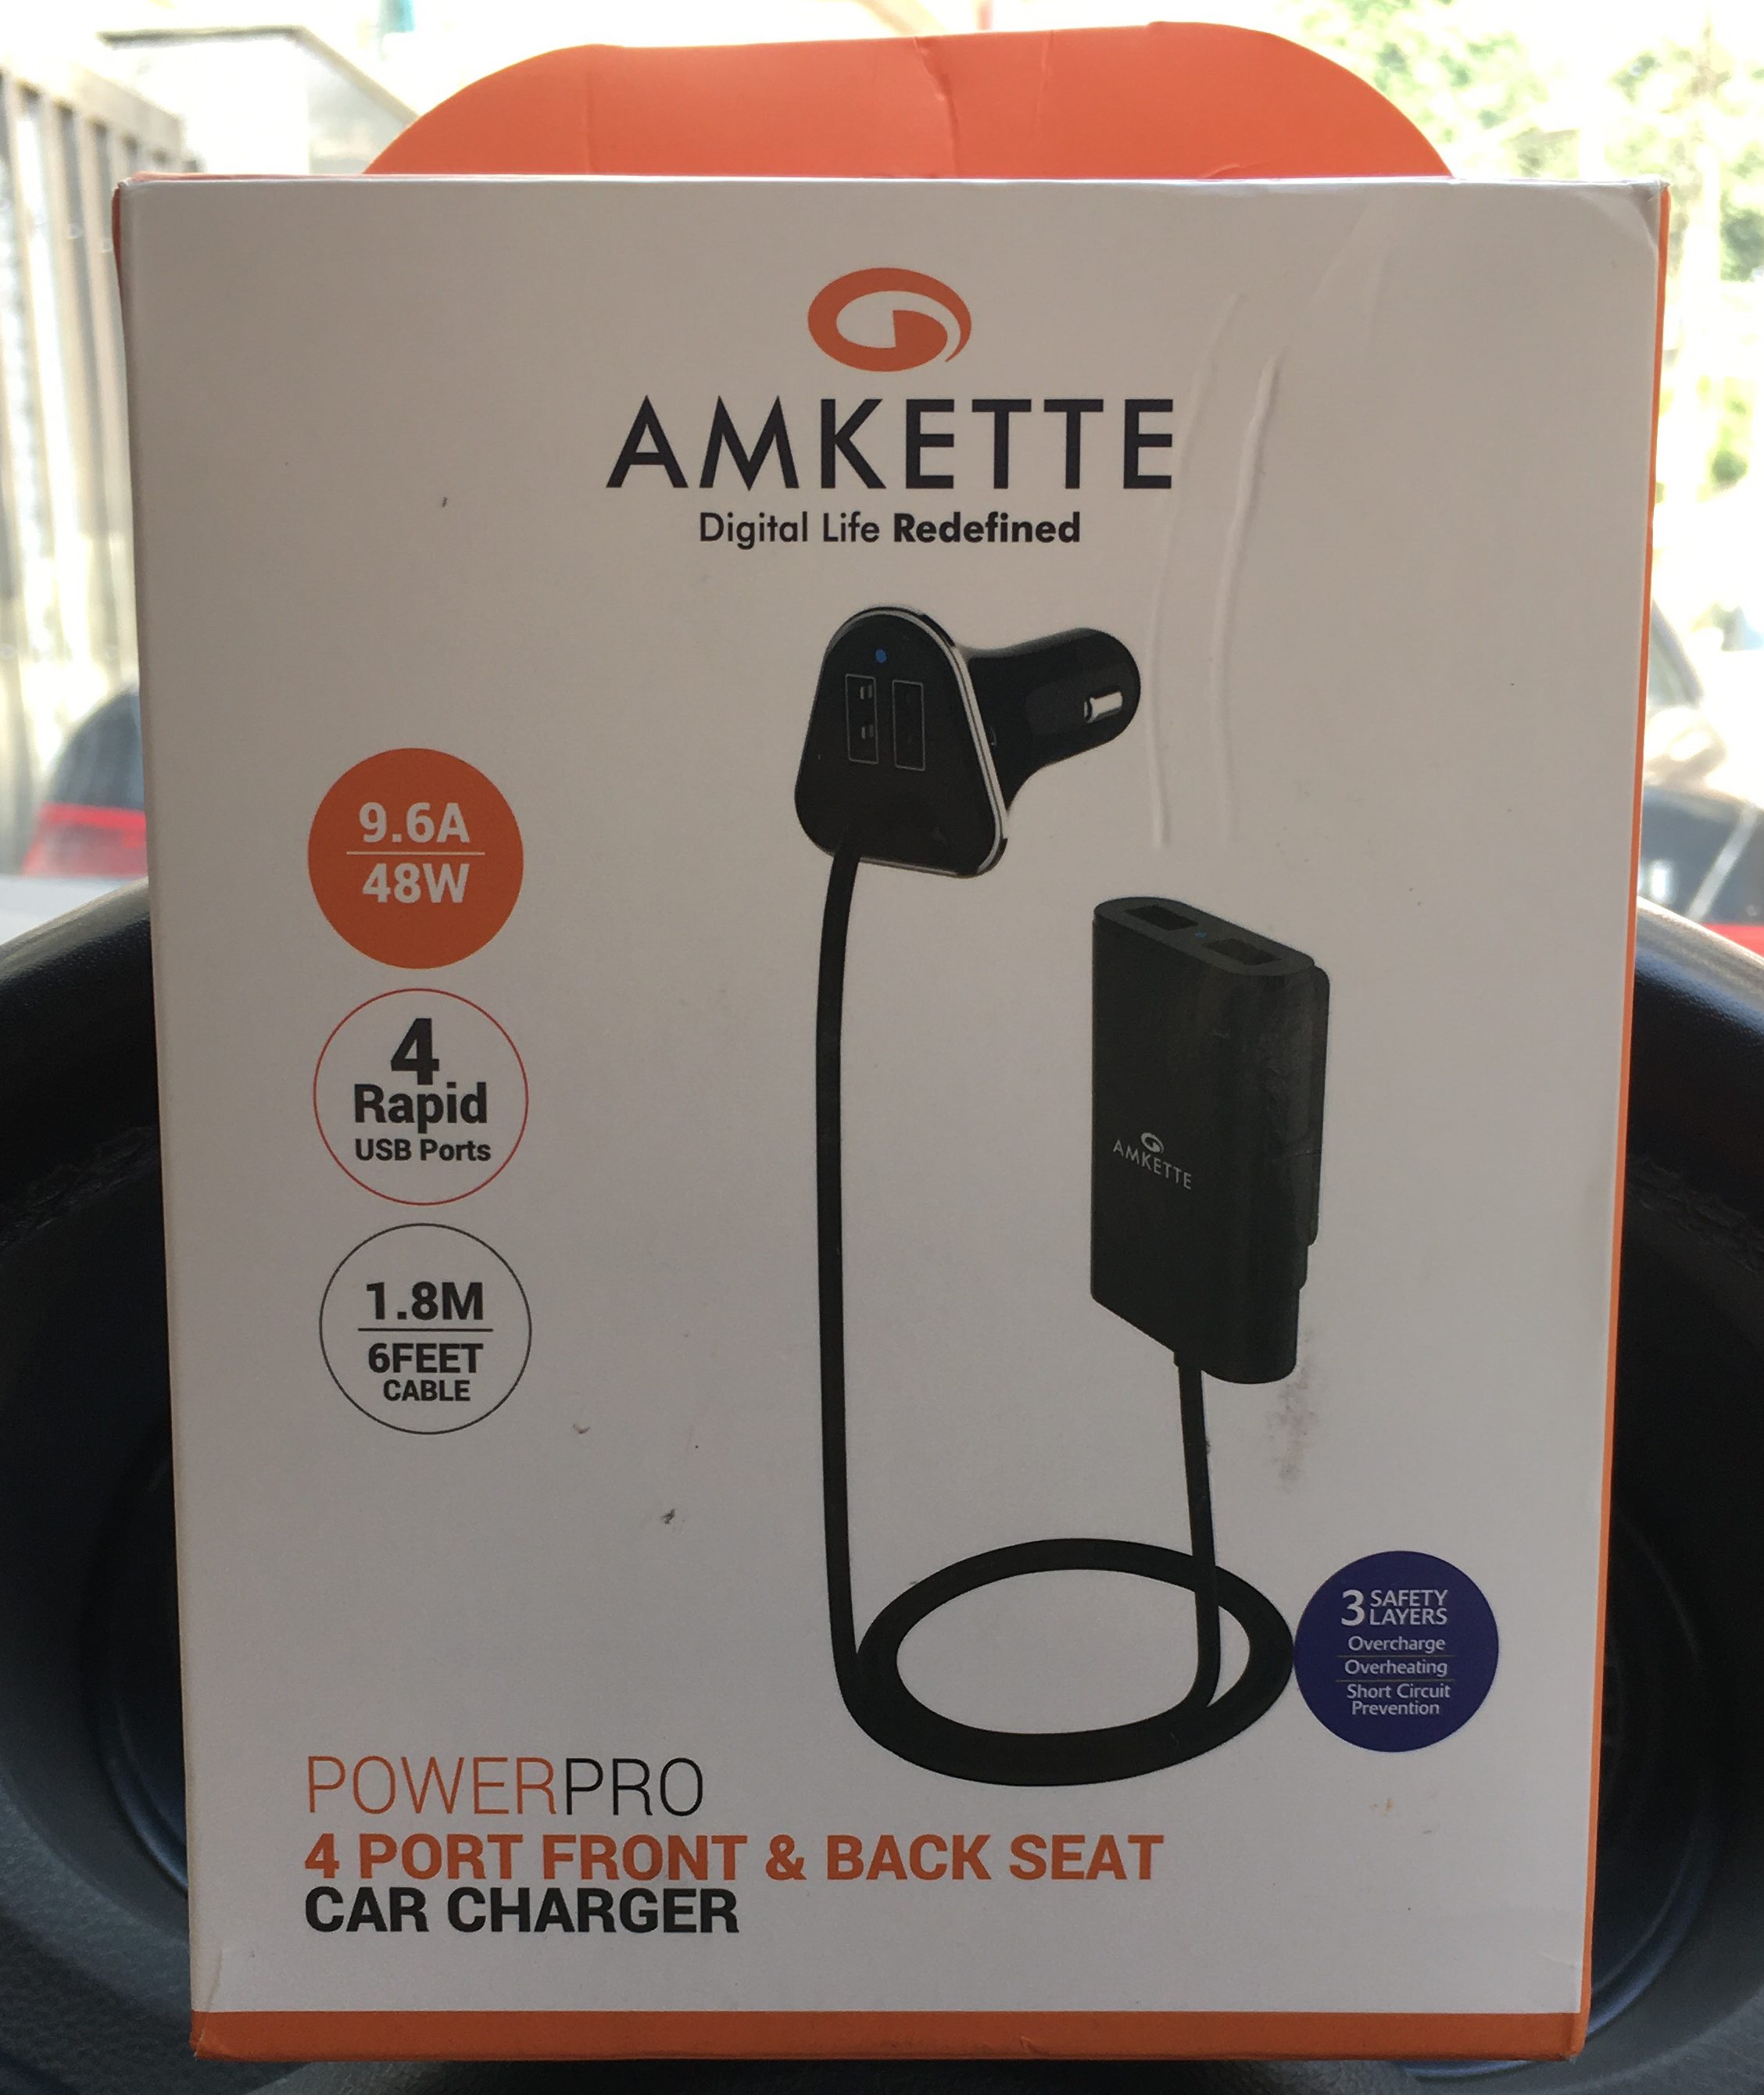 Amkette 4 Port Front and Back Seat 9.6A Car Charger (Black)